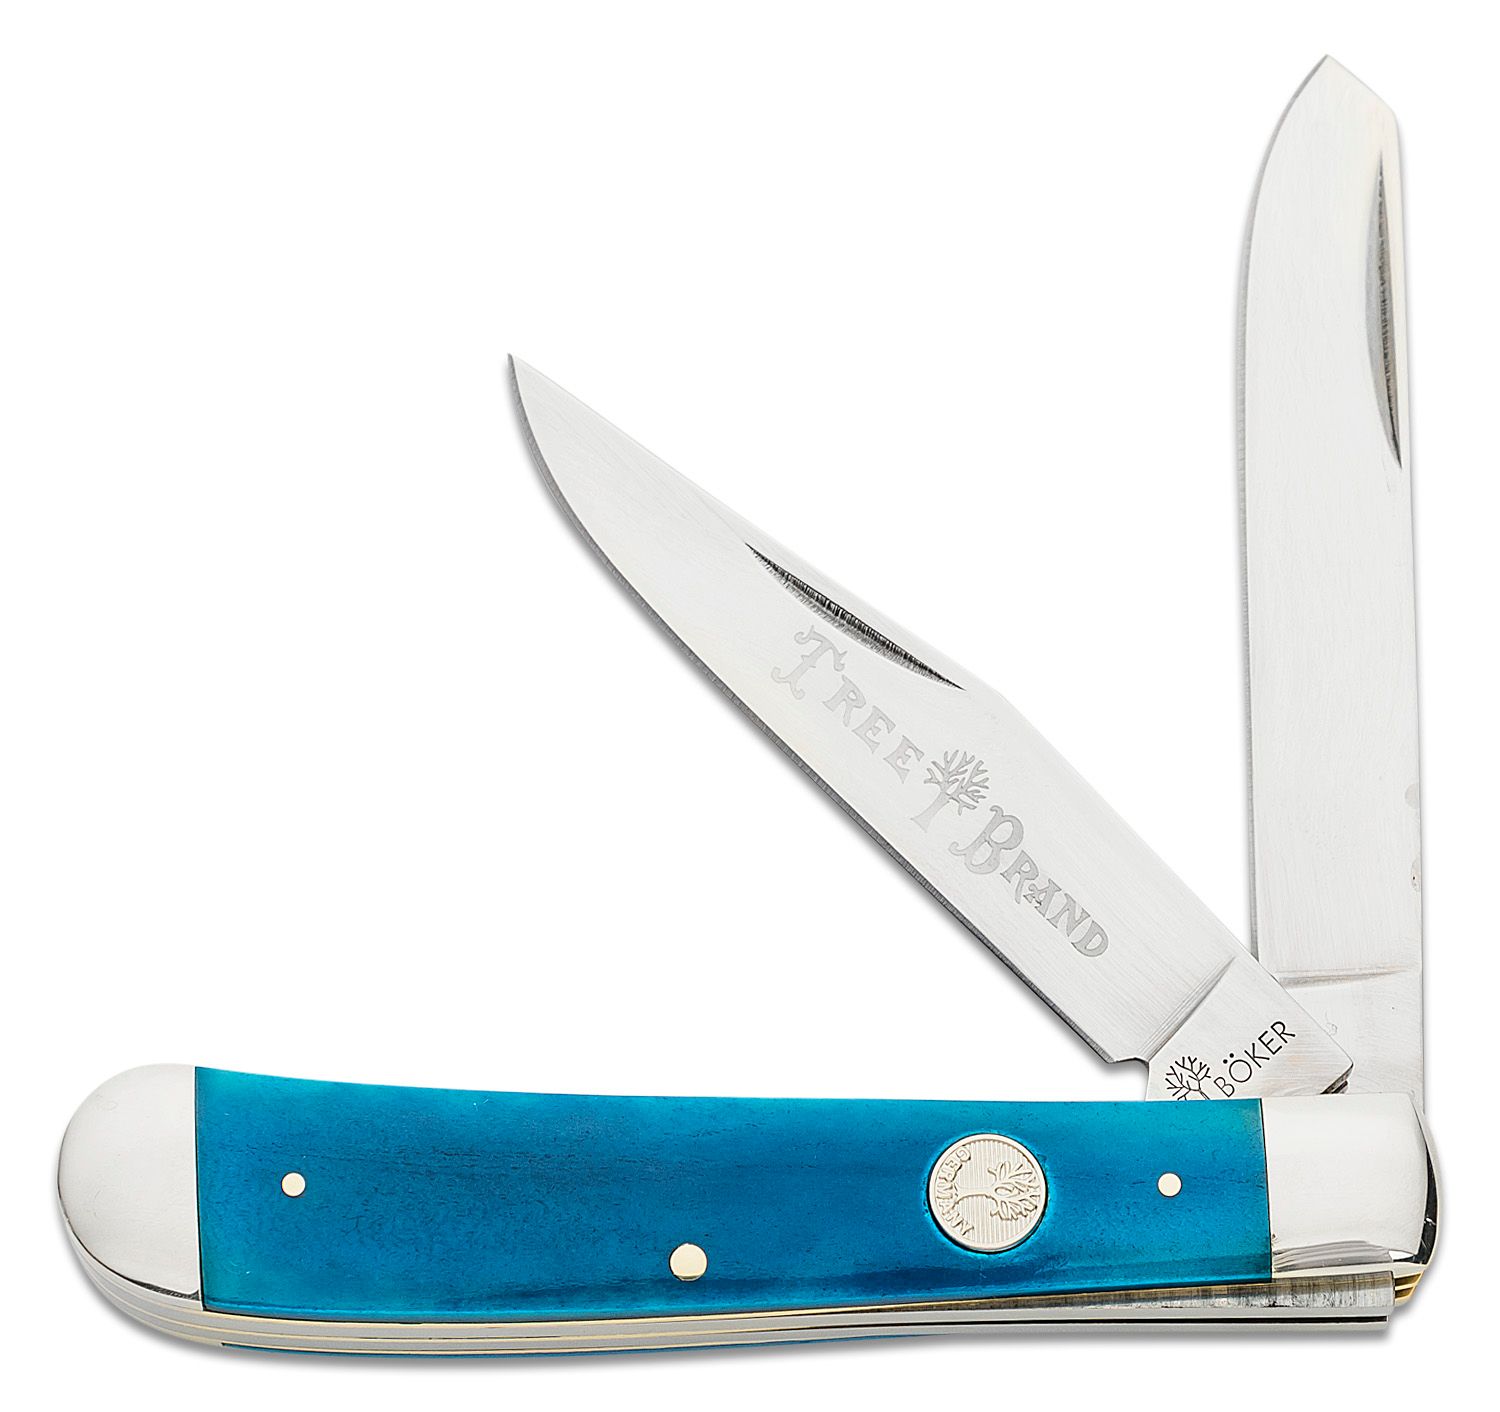 Boker Traditional Series 2.0 Trapper, Smooth Blue Bone Handles with Nickel  Silver Bolsters, D2 Blade 4.25 Closed - KnifeCenter - 110828